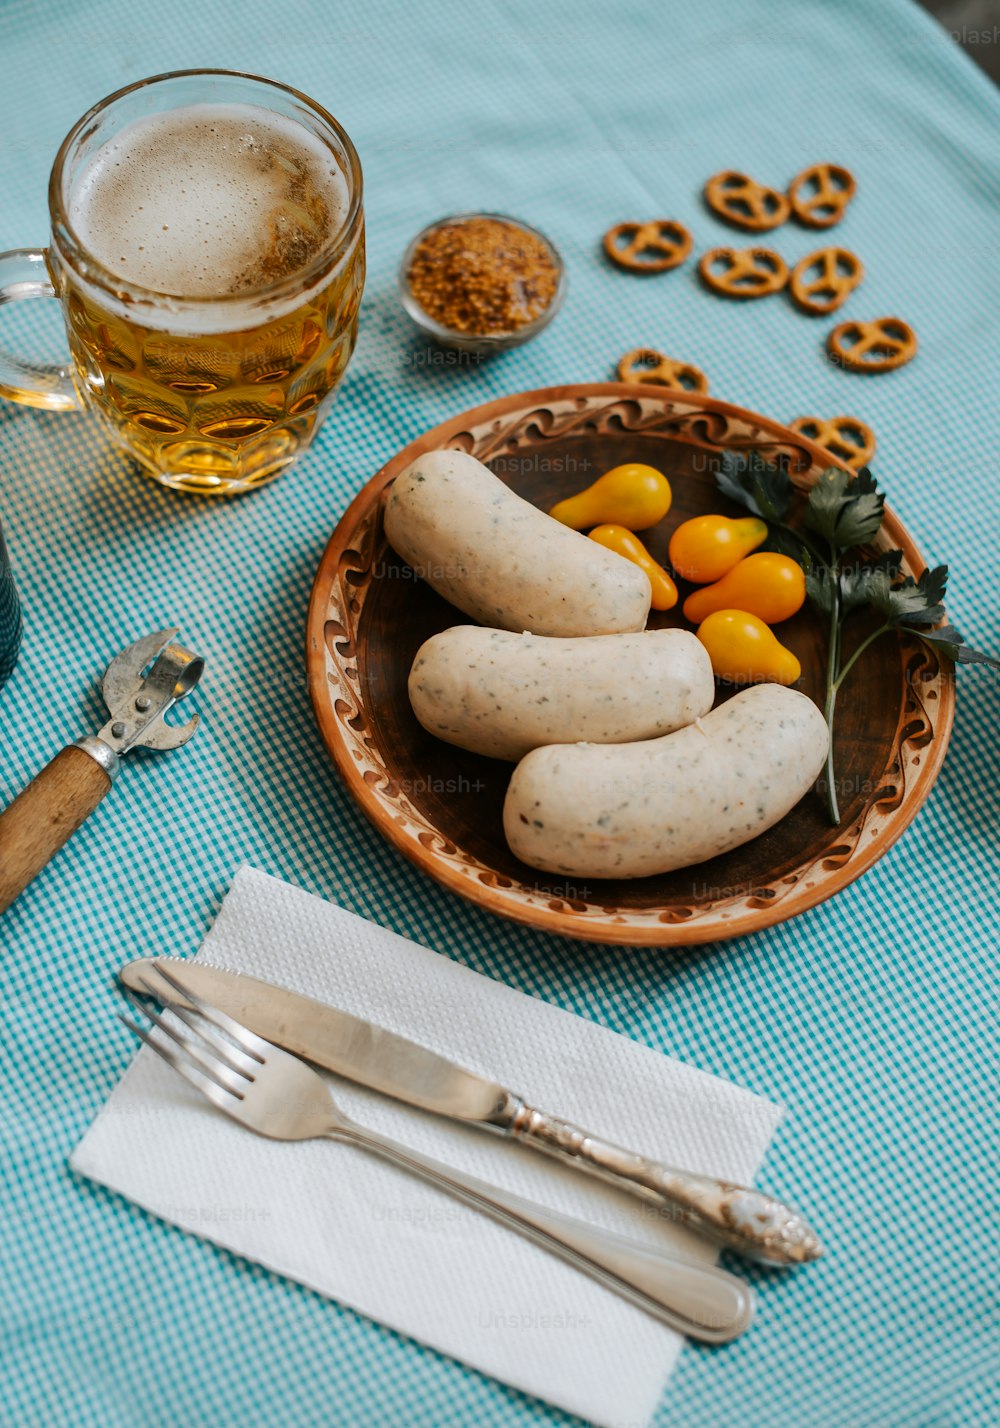 a plate of food on a table next to a glass of beer